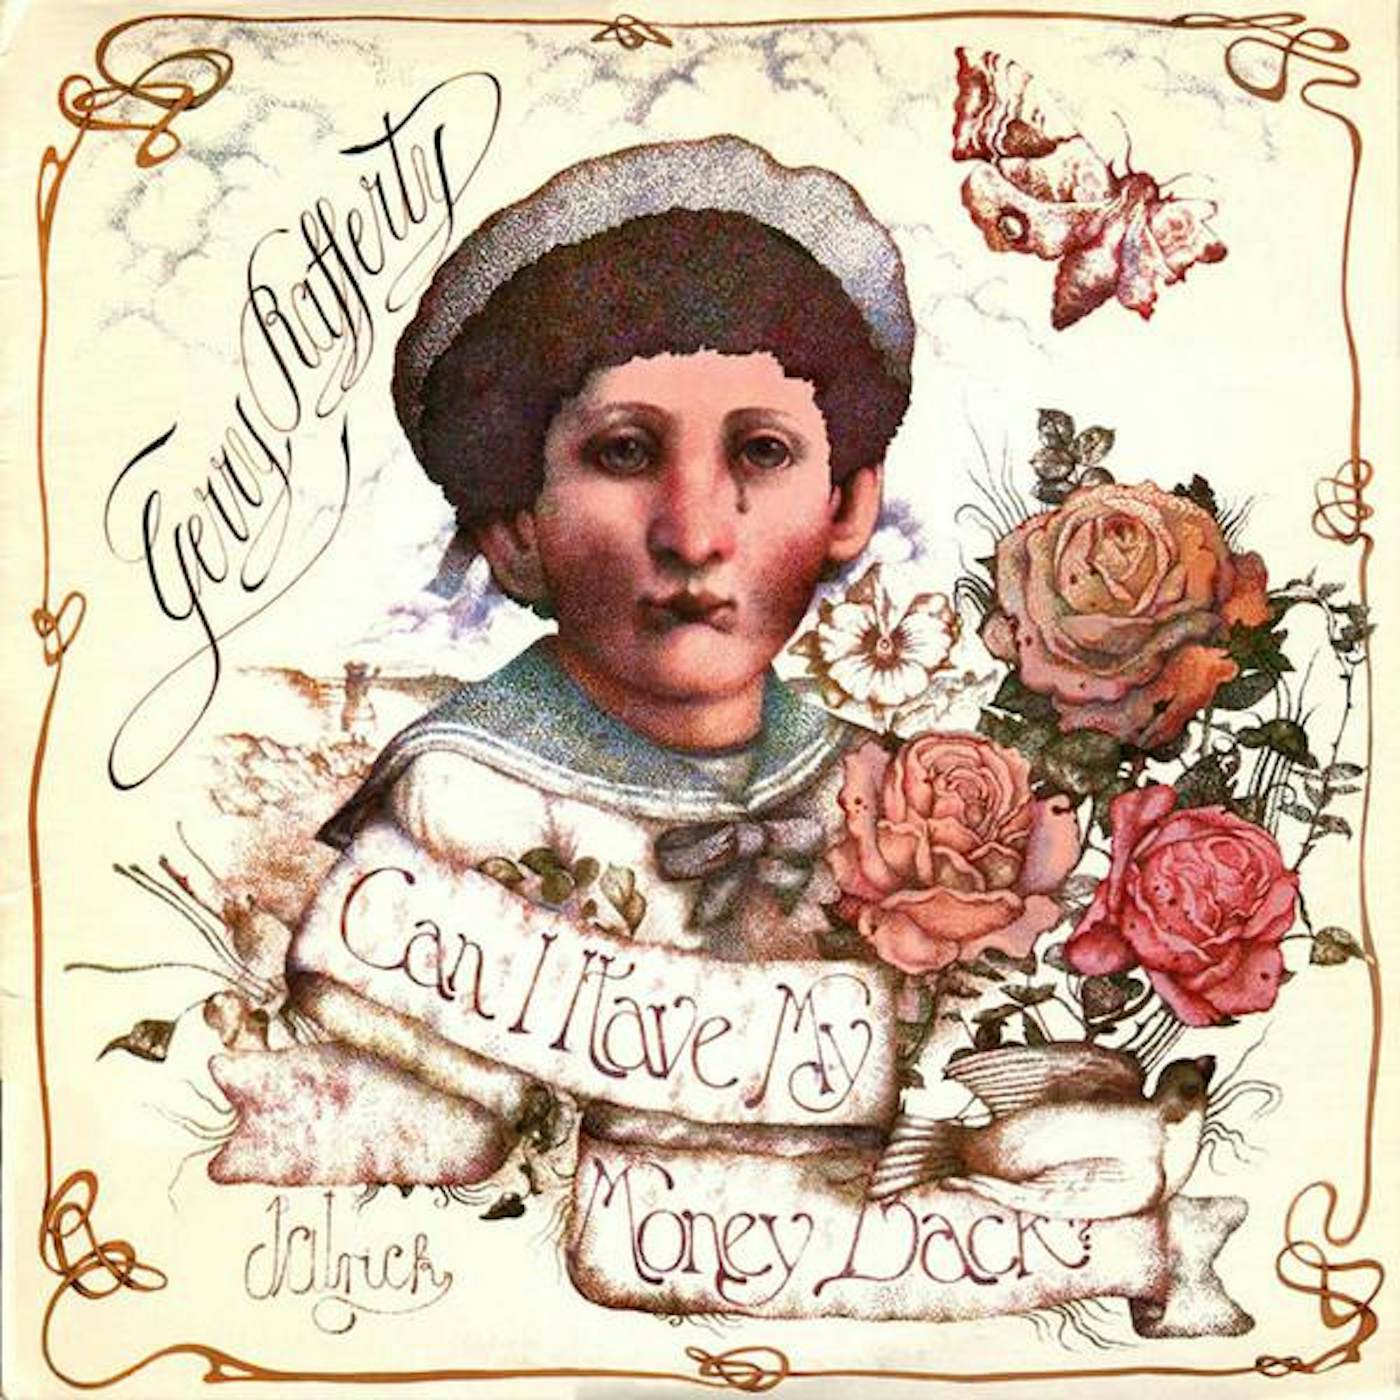 Gerry Rafferty CAN I HAVE MY MONEY BACK (REMASTERED/EXPANDED EDITION) CD